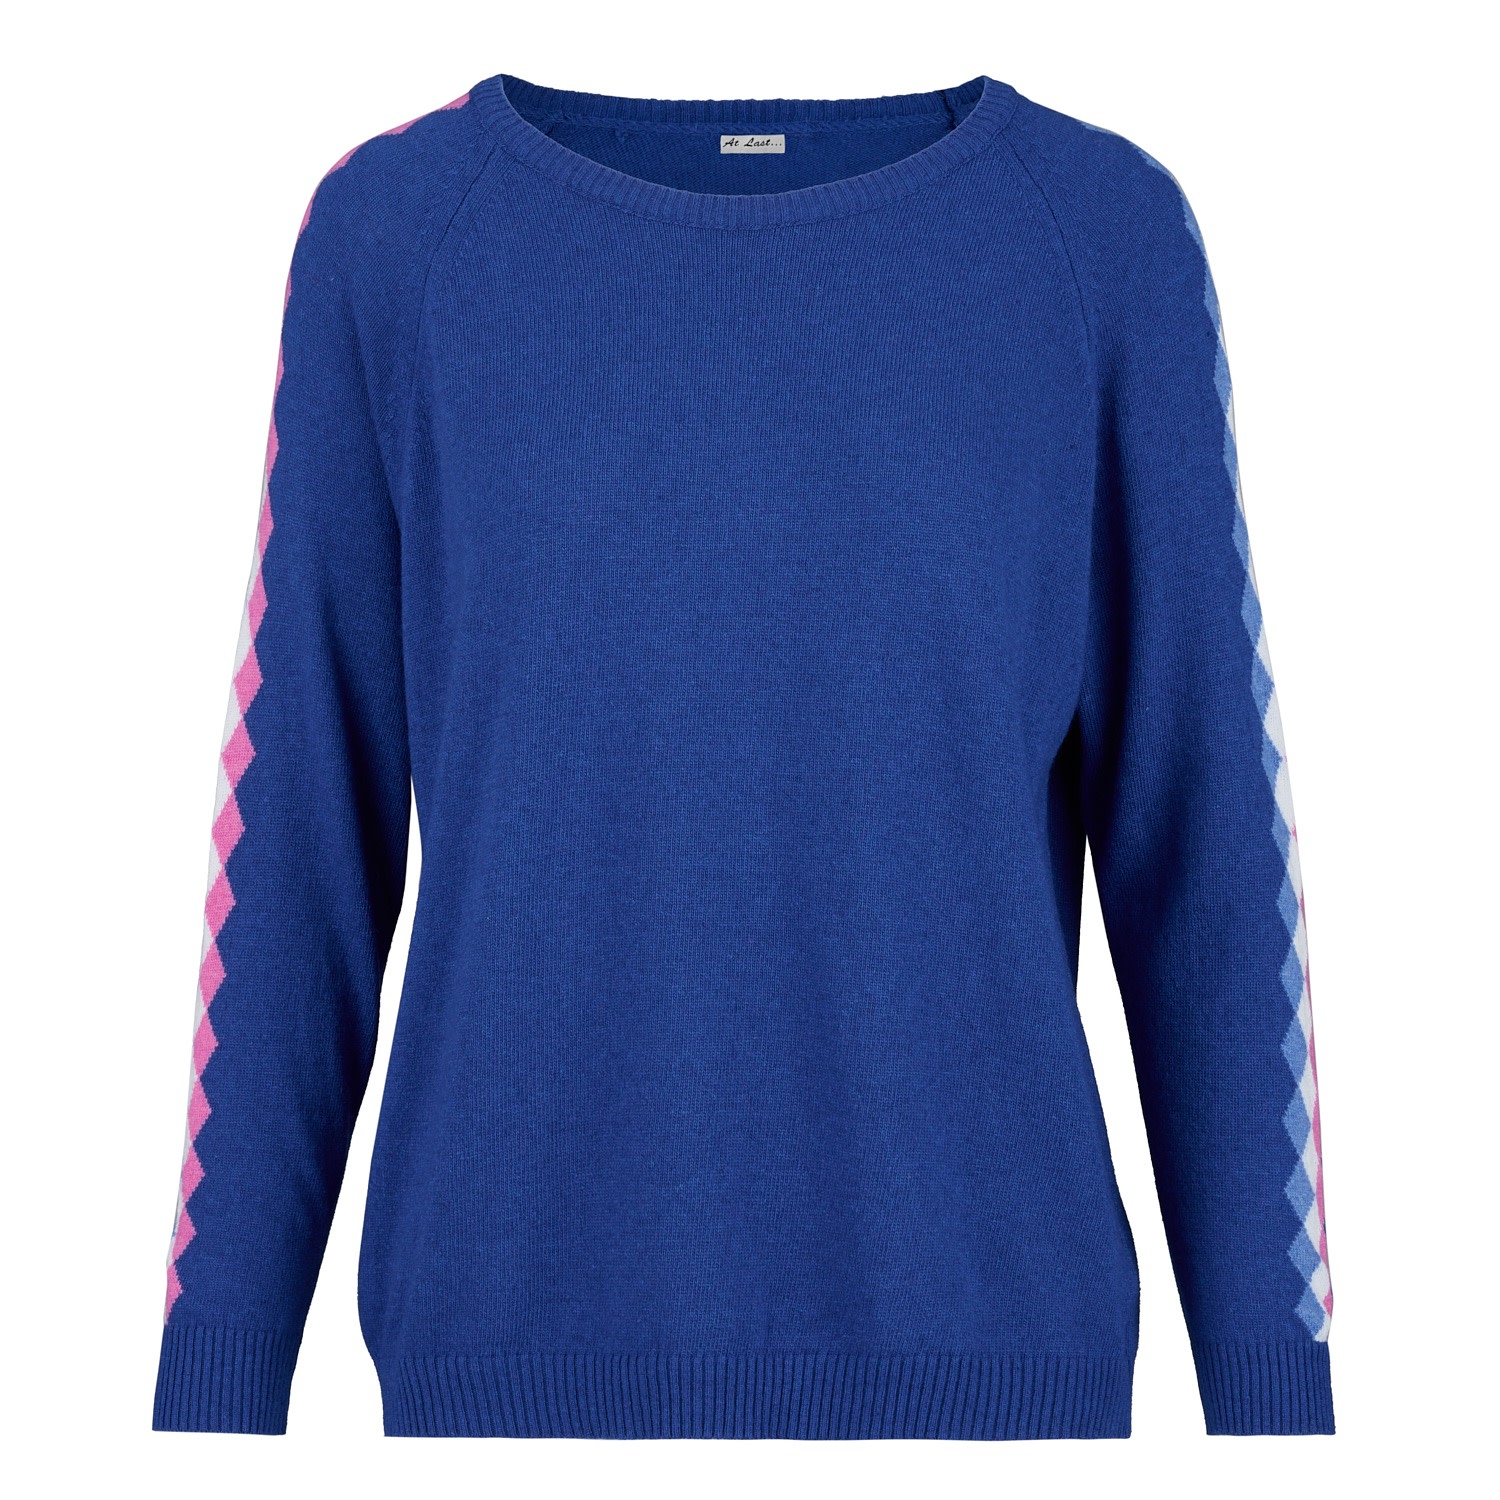 Women’s Cashmere Mix Sweater In Royal Blue With Multi Diamond Arm Stripe One Size At Last...